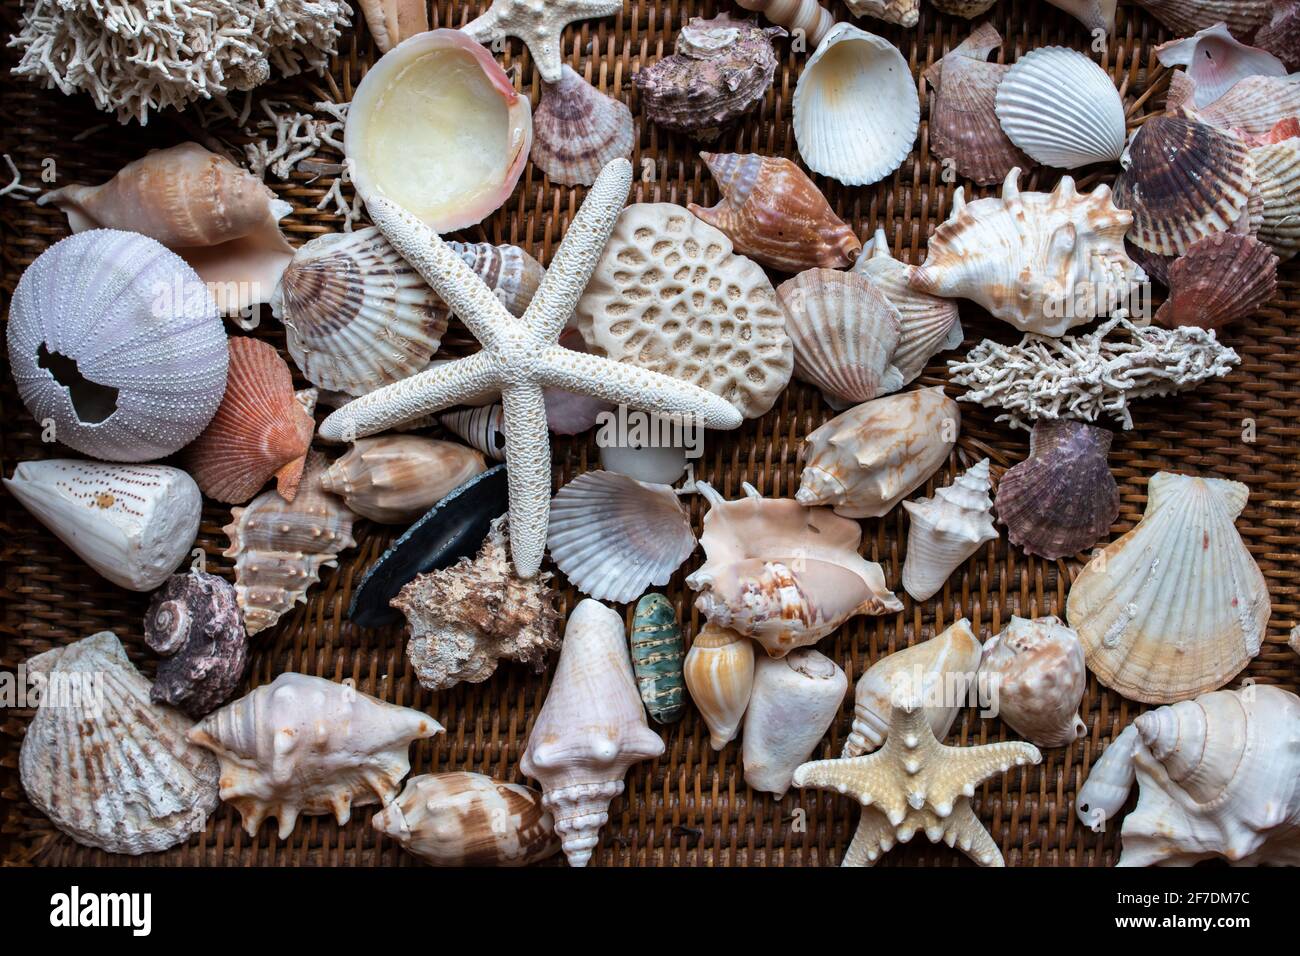 Picturesque flat lay of colorful seashells, including bivalves, scallops and sea stars, on a brown wicker carrier. Stock Photo